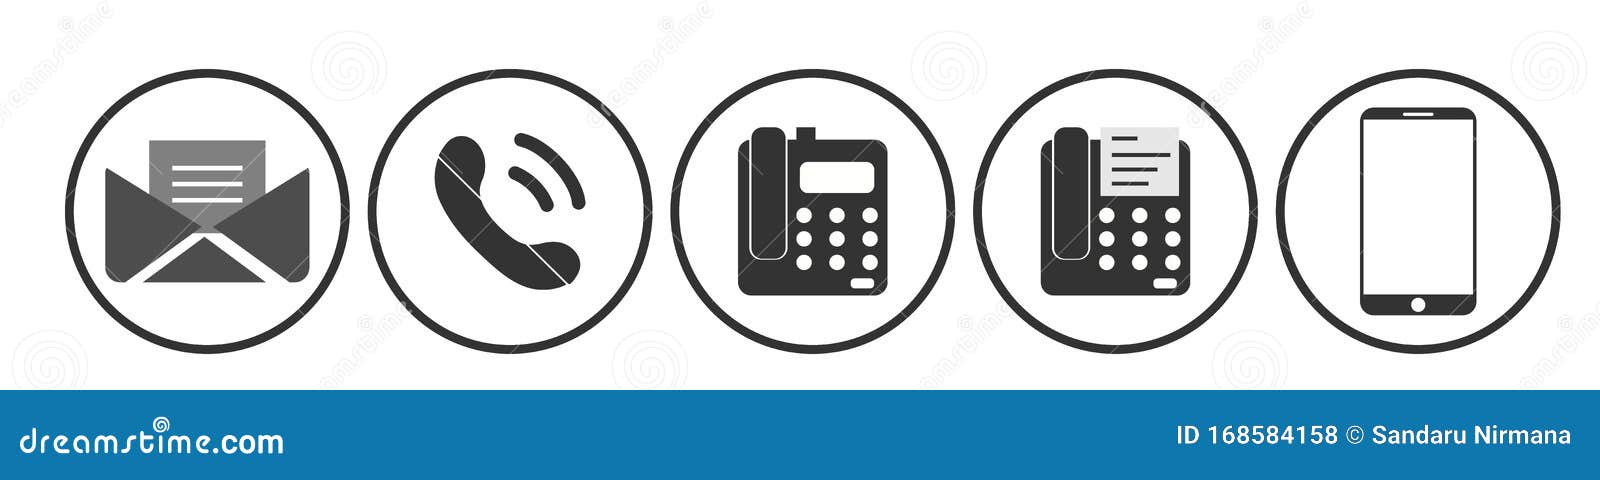 phone smartphone fax machin  message icon set call connection communication   on white background